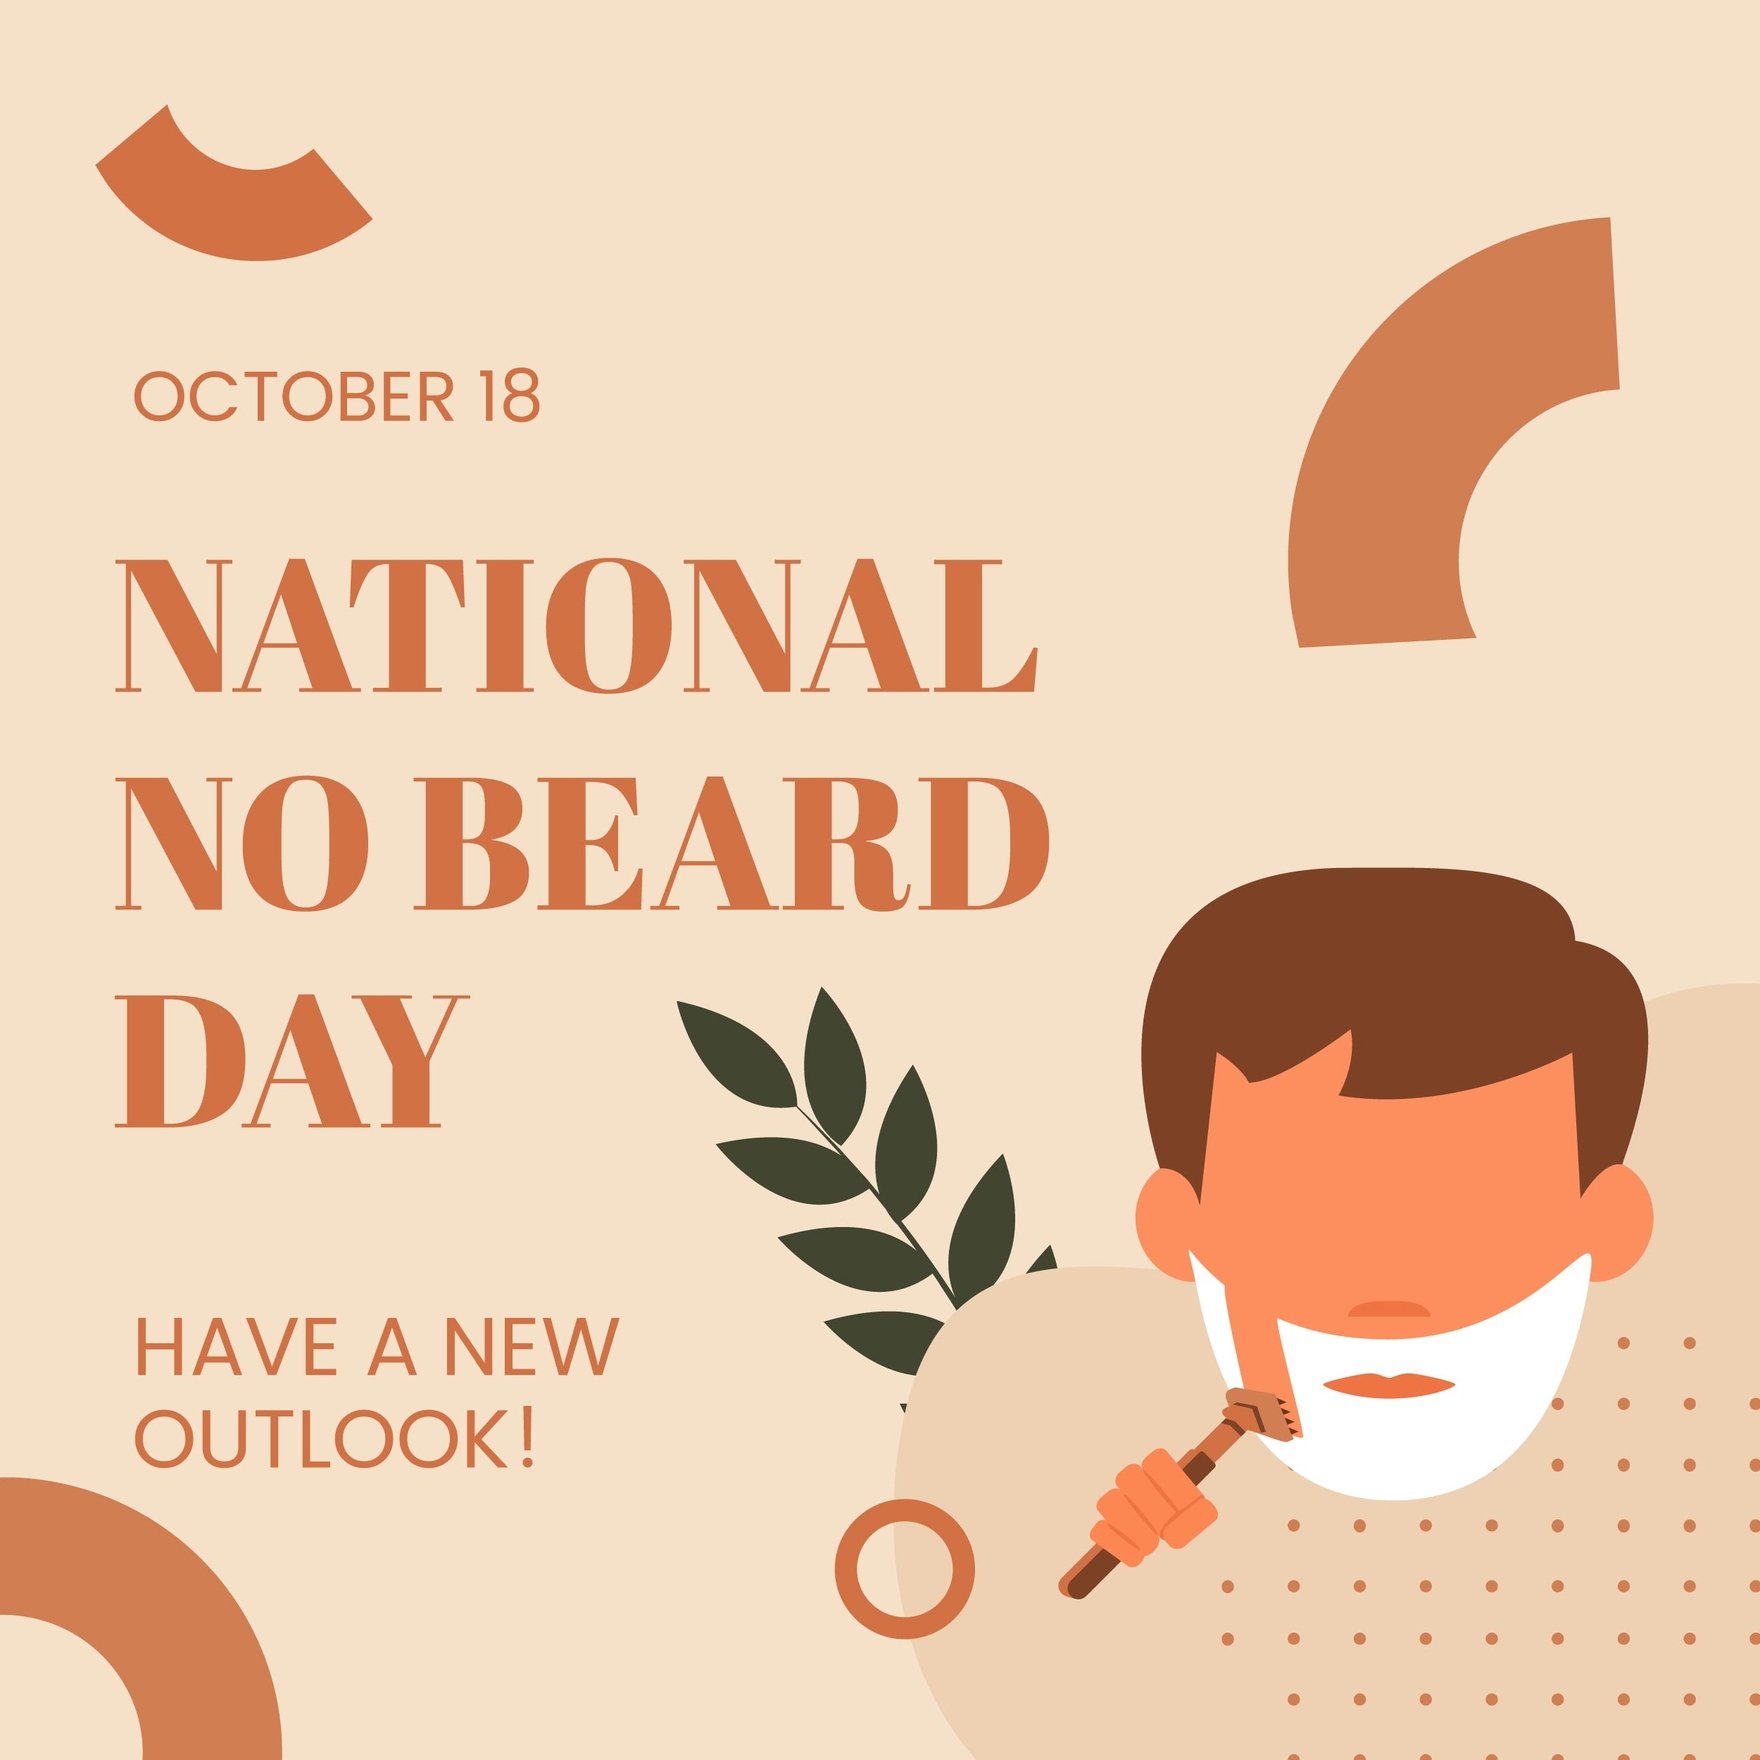 Free National No Beard Day Whatsapp Post in Illustrator, PSD, EPS, SVG, JPG, PNG